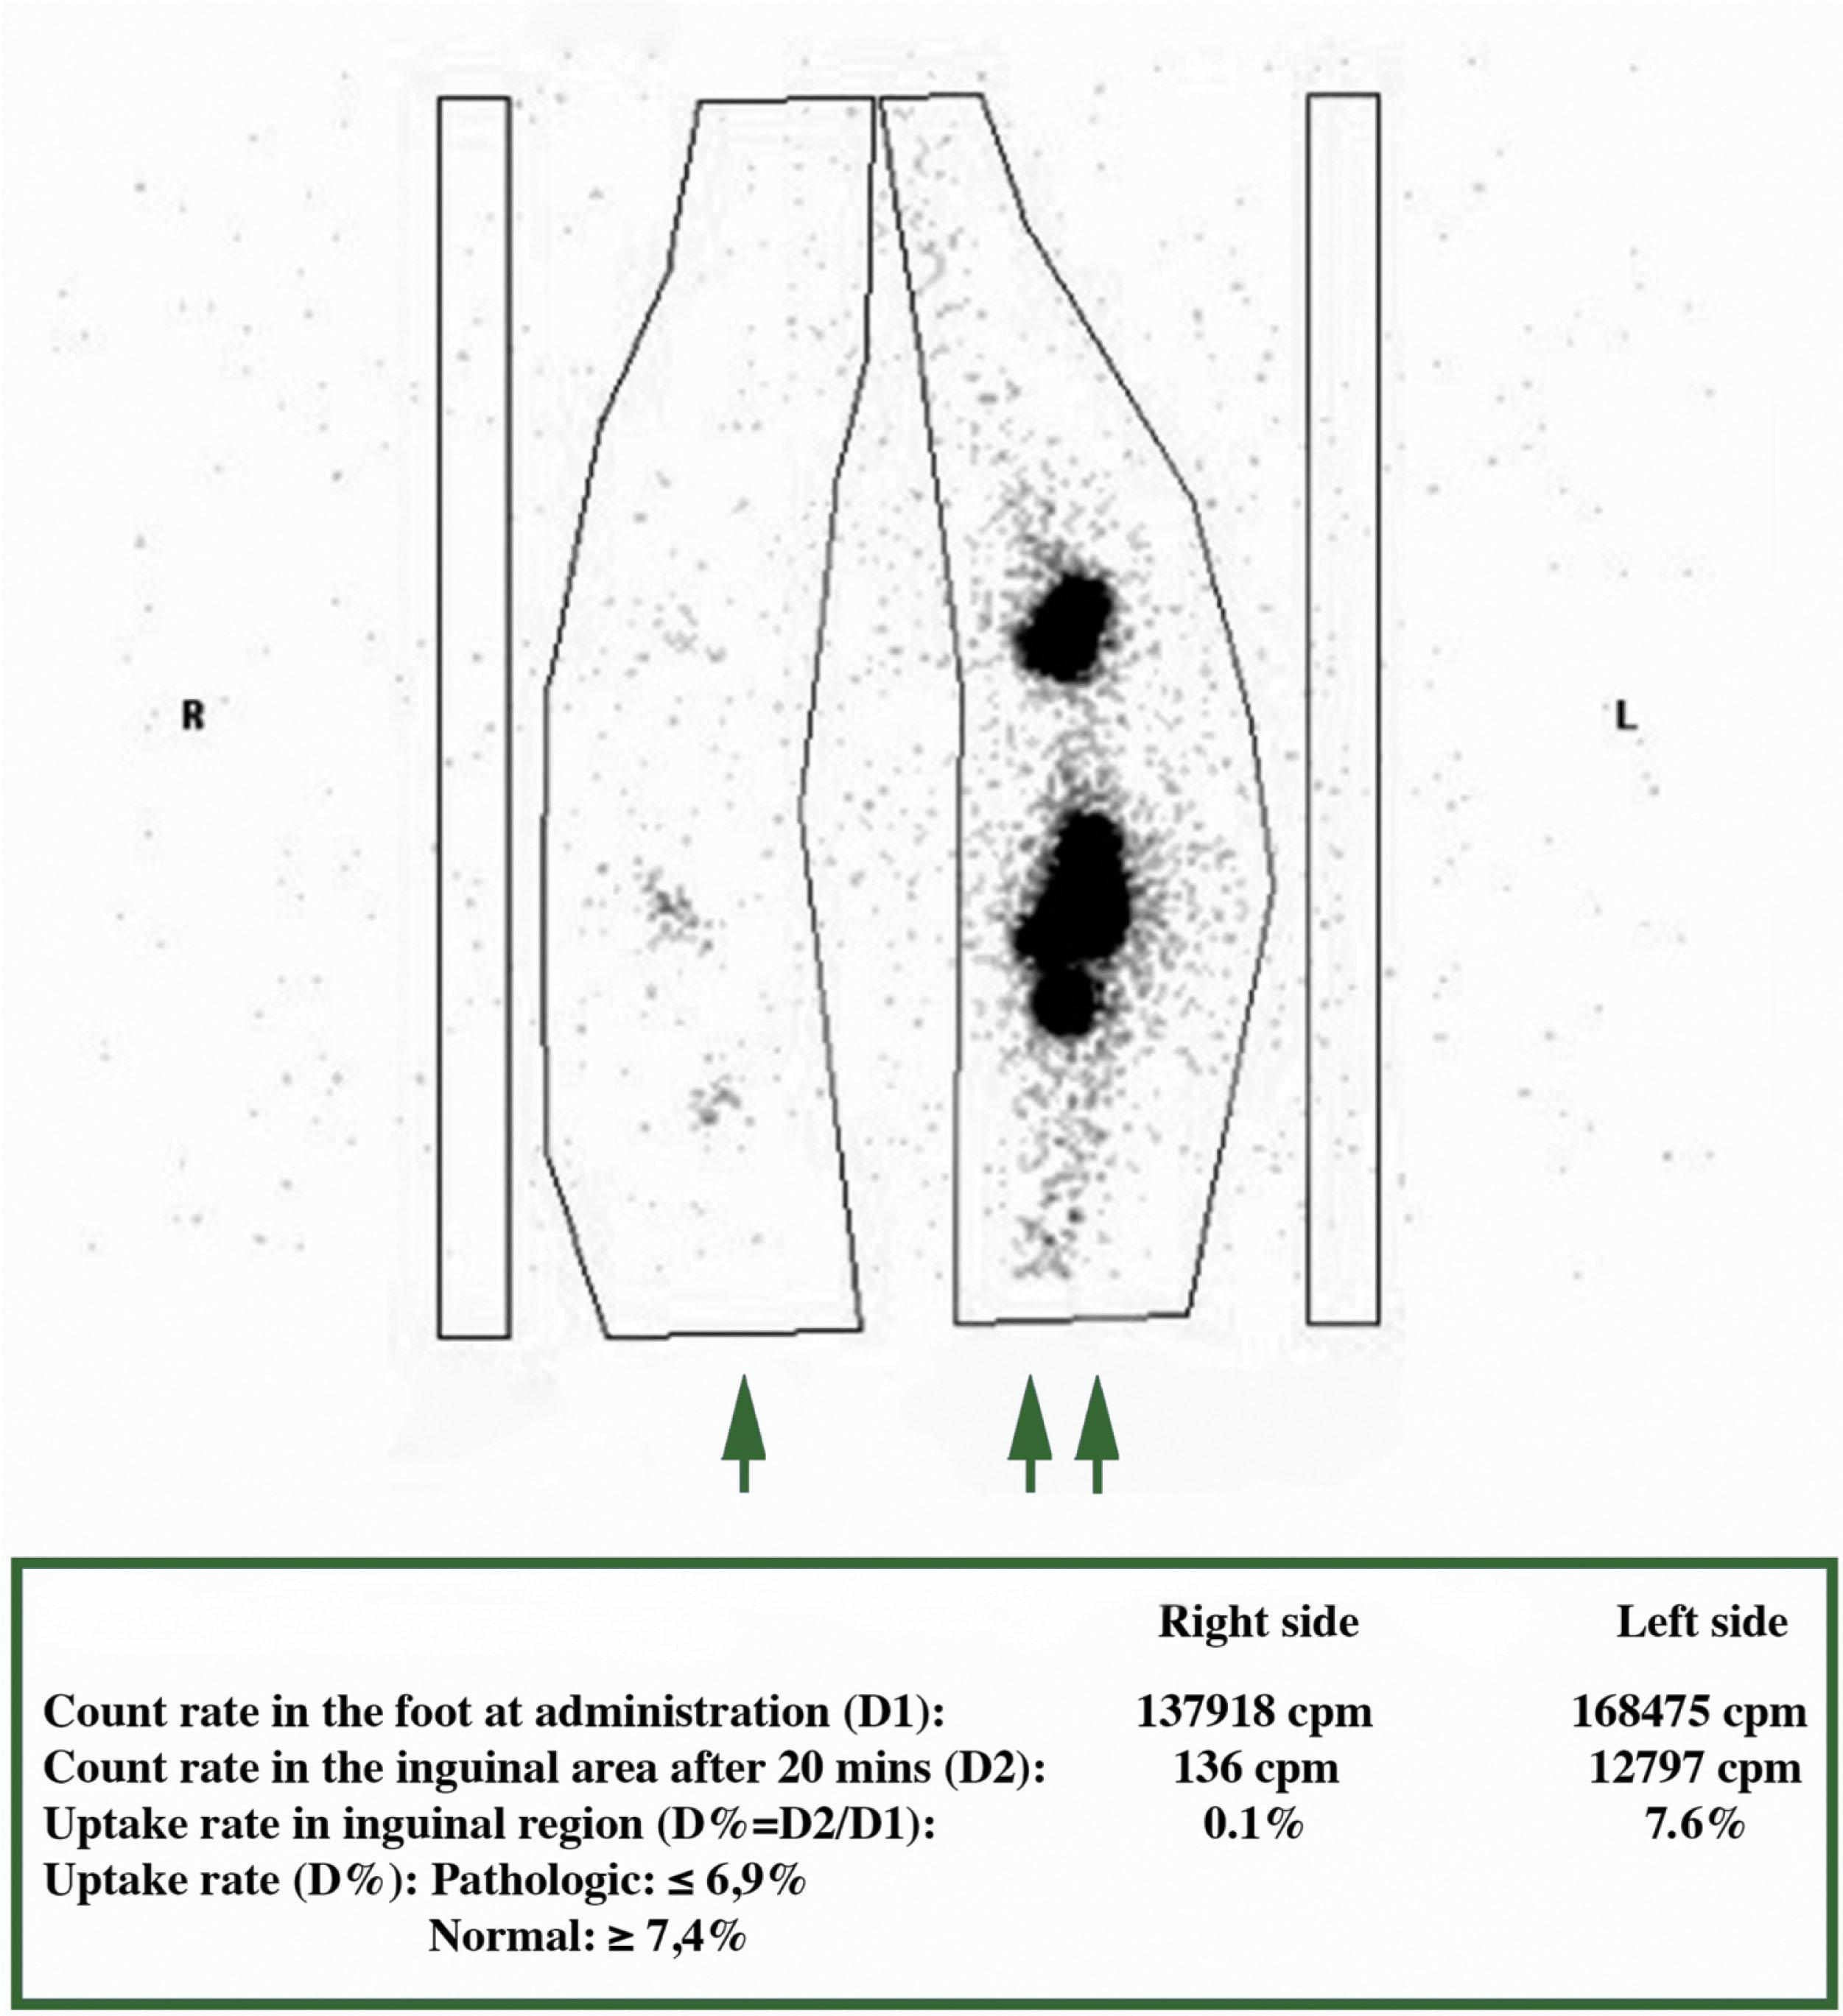 Figure 3.2.2, Quantitative evaluation based on the lymphoscintigraphy scan. (Inguinal area after isotope administration and 20 minutes of walking.) Isotope uptake rate in the inguinal lymph nodes is calculated on the healthy (double arrow) and affected (single arrow) sides. cpm, counts per minute.